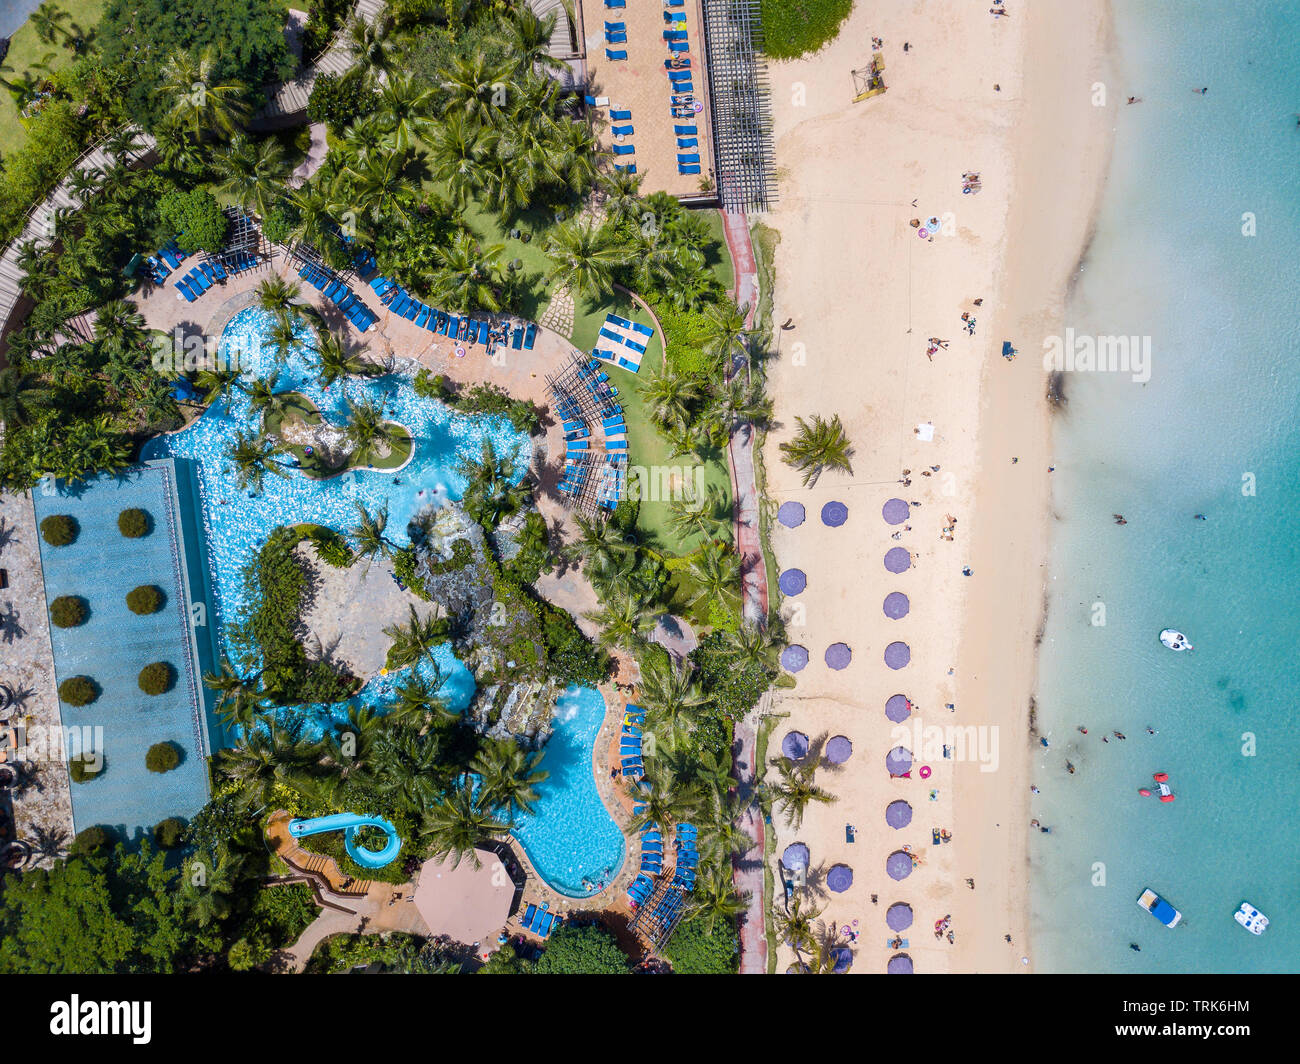 An aerial view of the pool and beach at the Outrigger Hotel on Tumon Bay, Guam, Micronesia, Mariana Islands, Pacific Ocean. Stock Photo